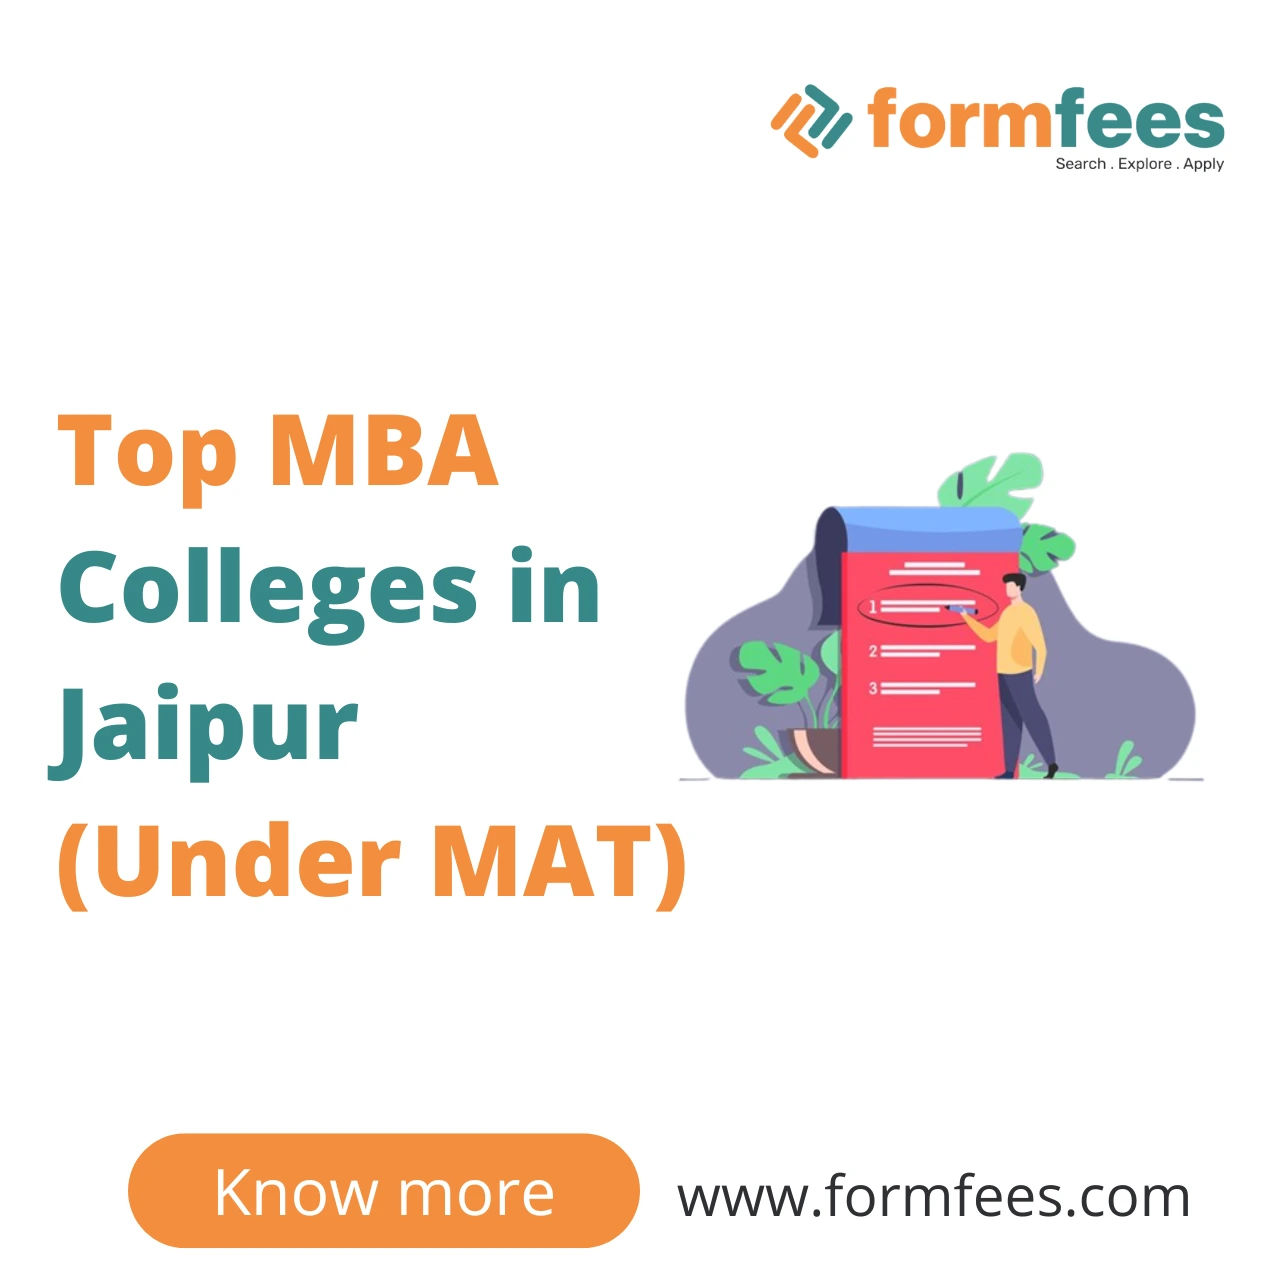 Top MBA Colleges in Jaipur (Under MAT)